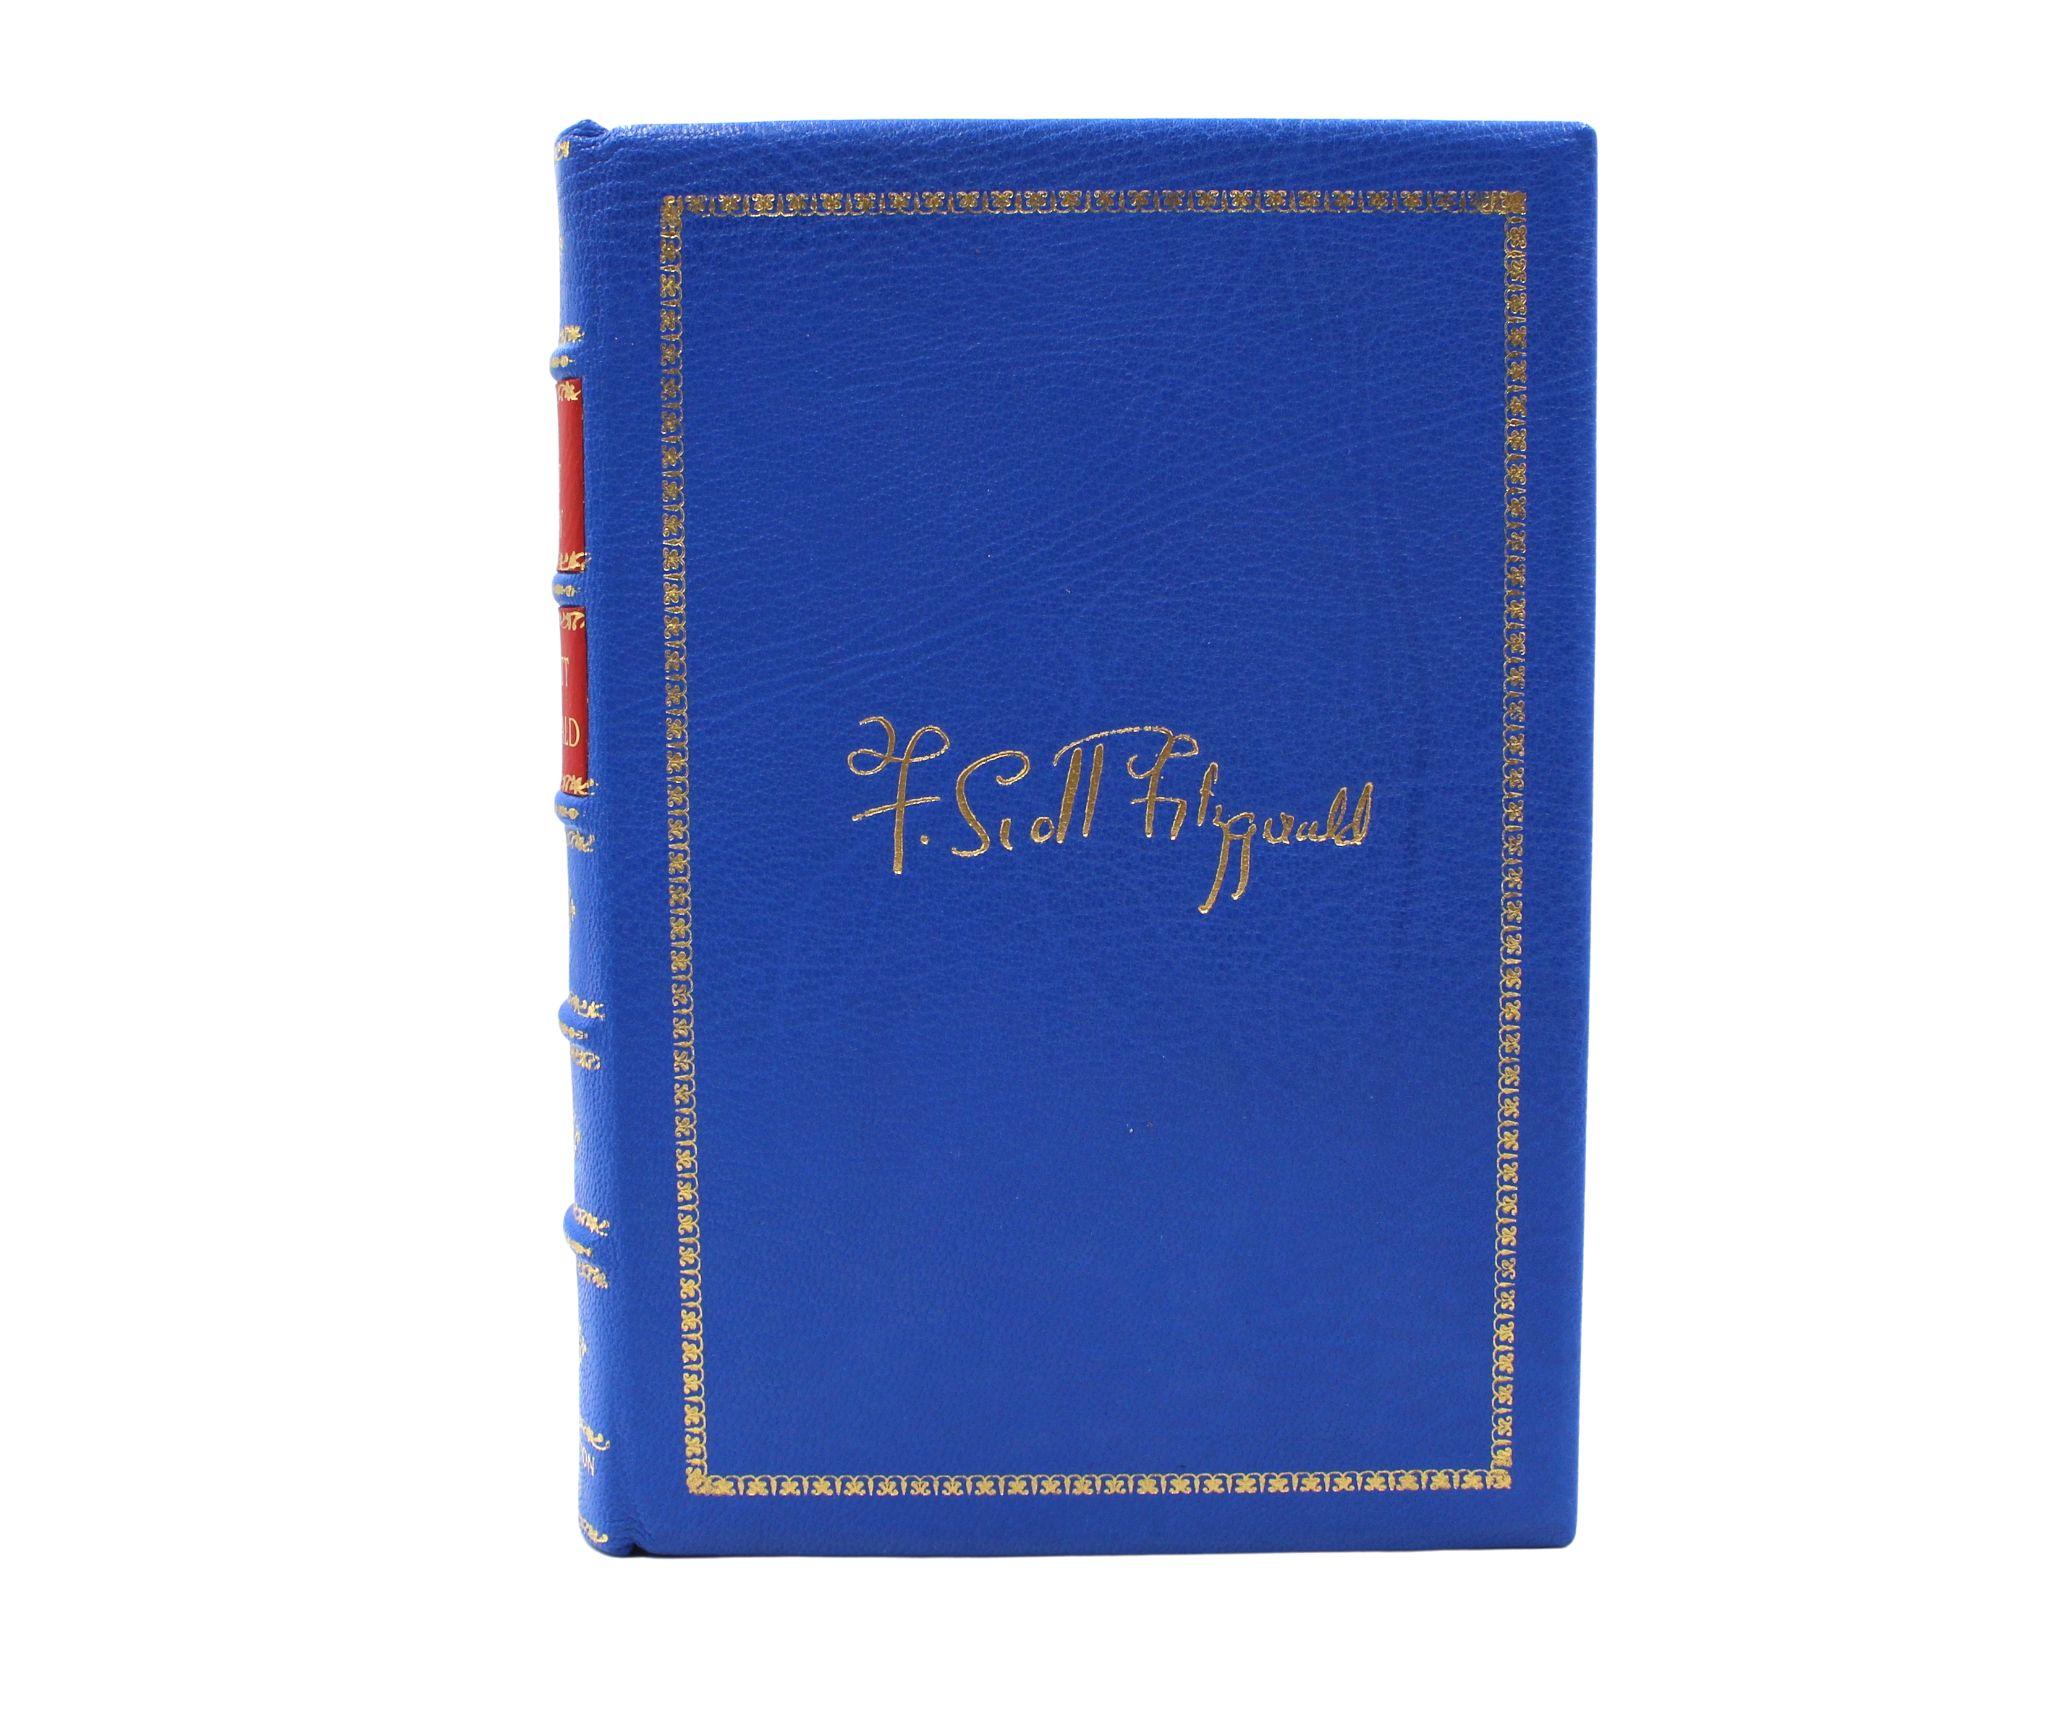 Embossed The Great Gatsby by F. Scott Fitzgerald, First Edition, First Issue, 1925 For Sale